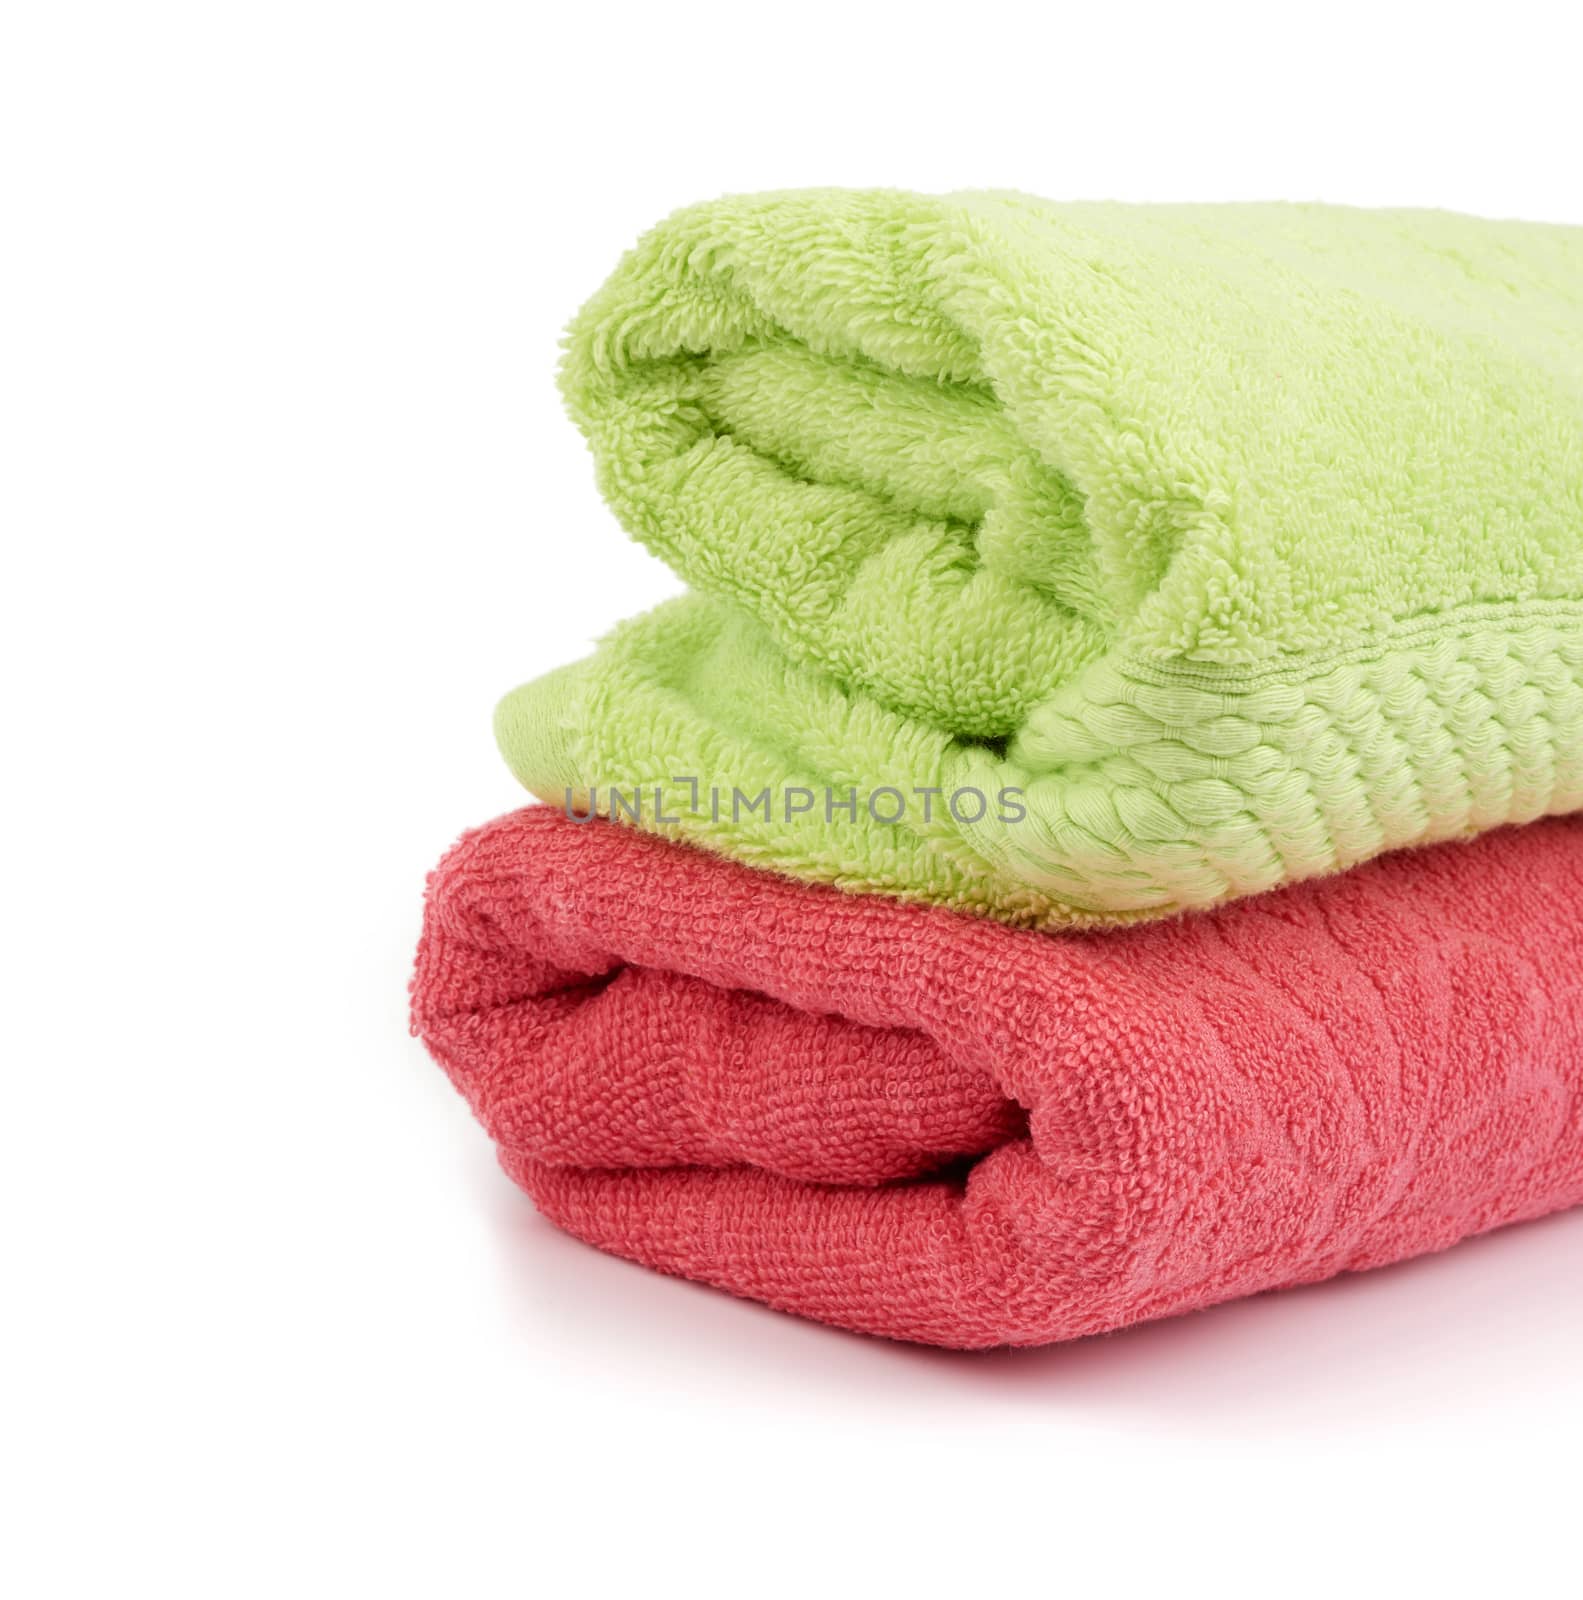 stack of colored cotton terry folded towels on a white backgroun by ndanko